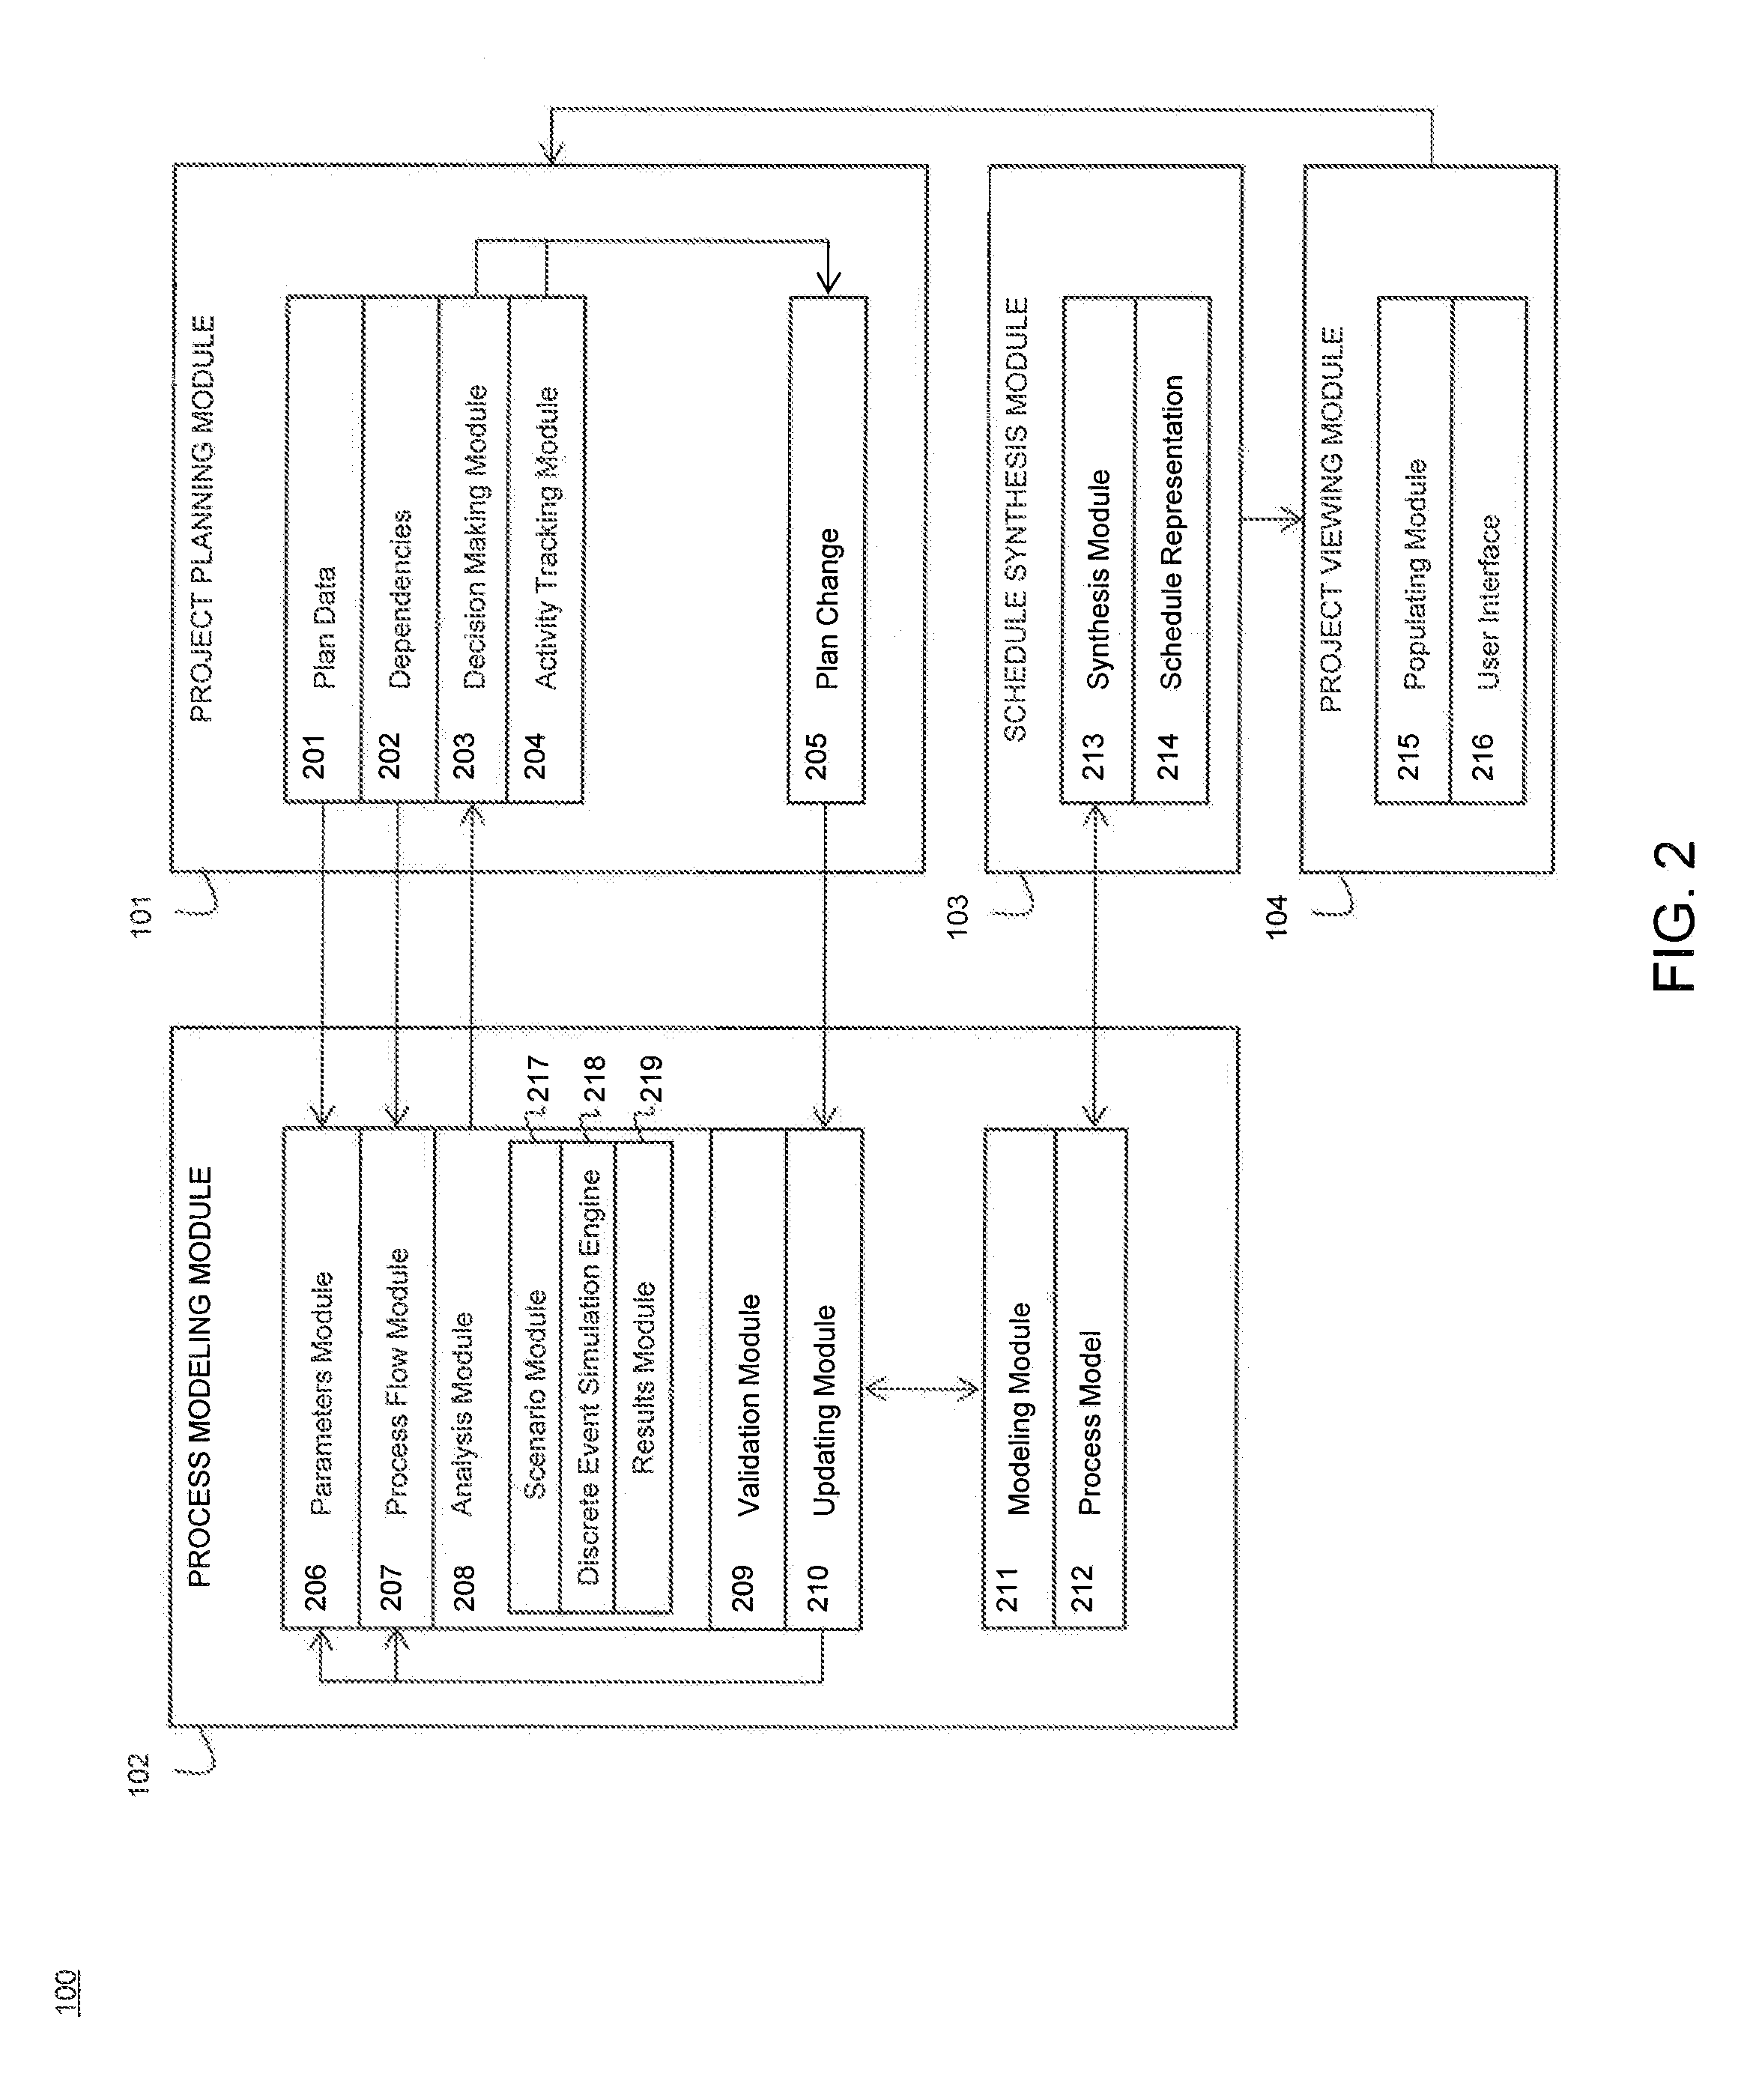 Synthesis of a schedule representation from a process model